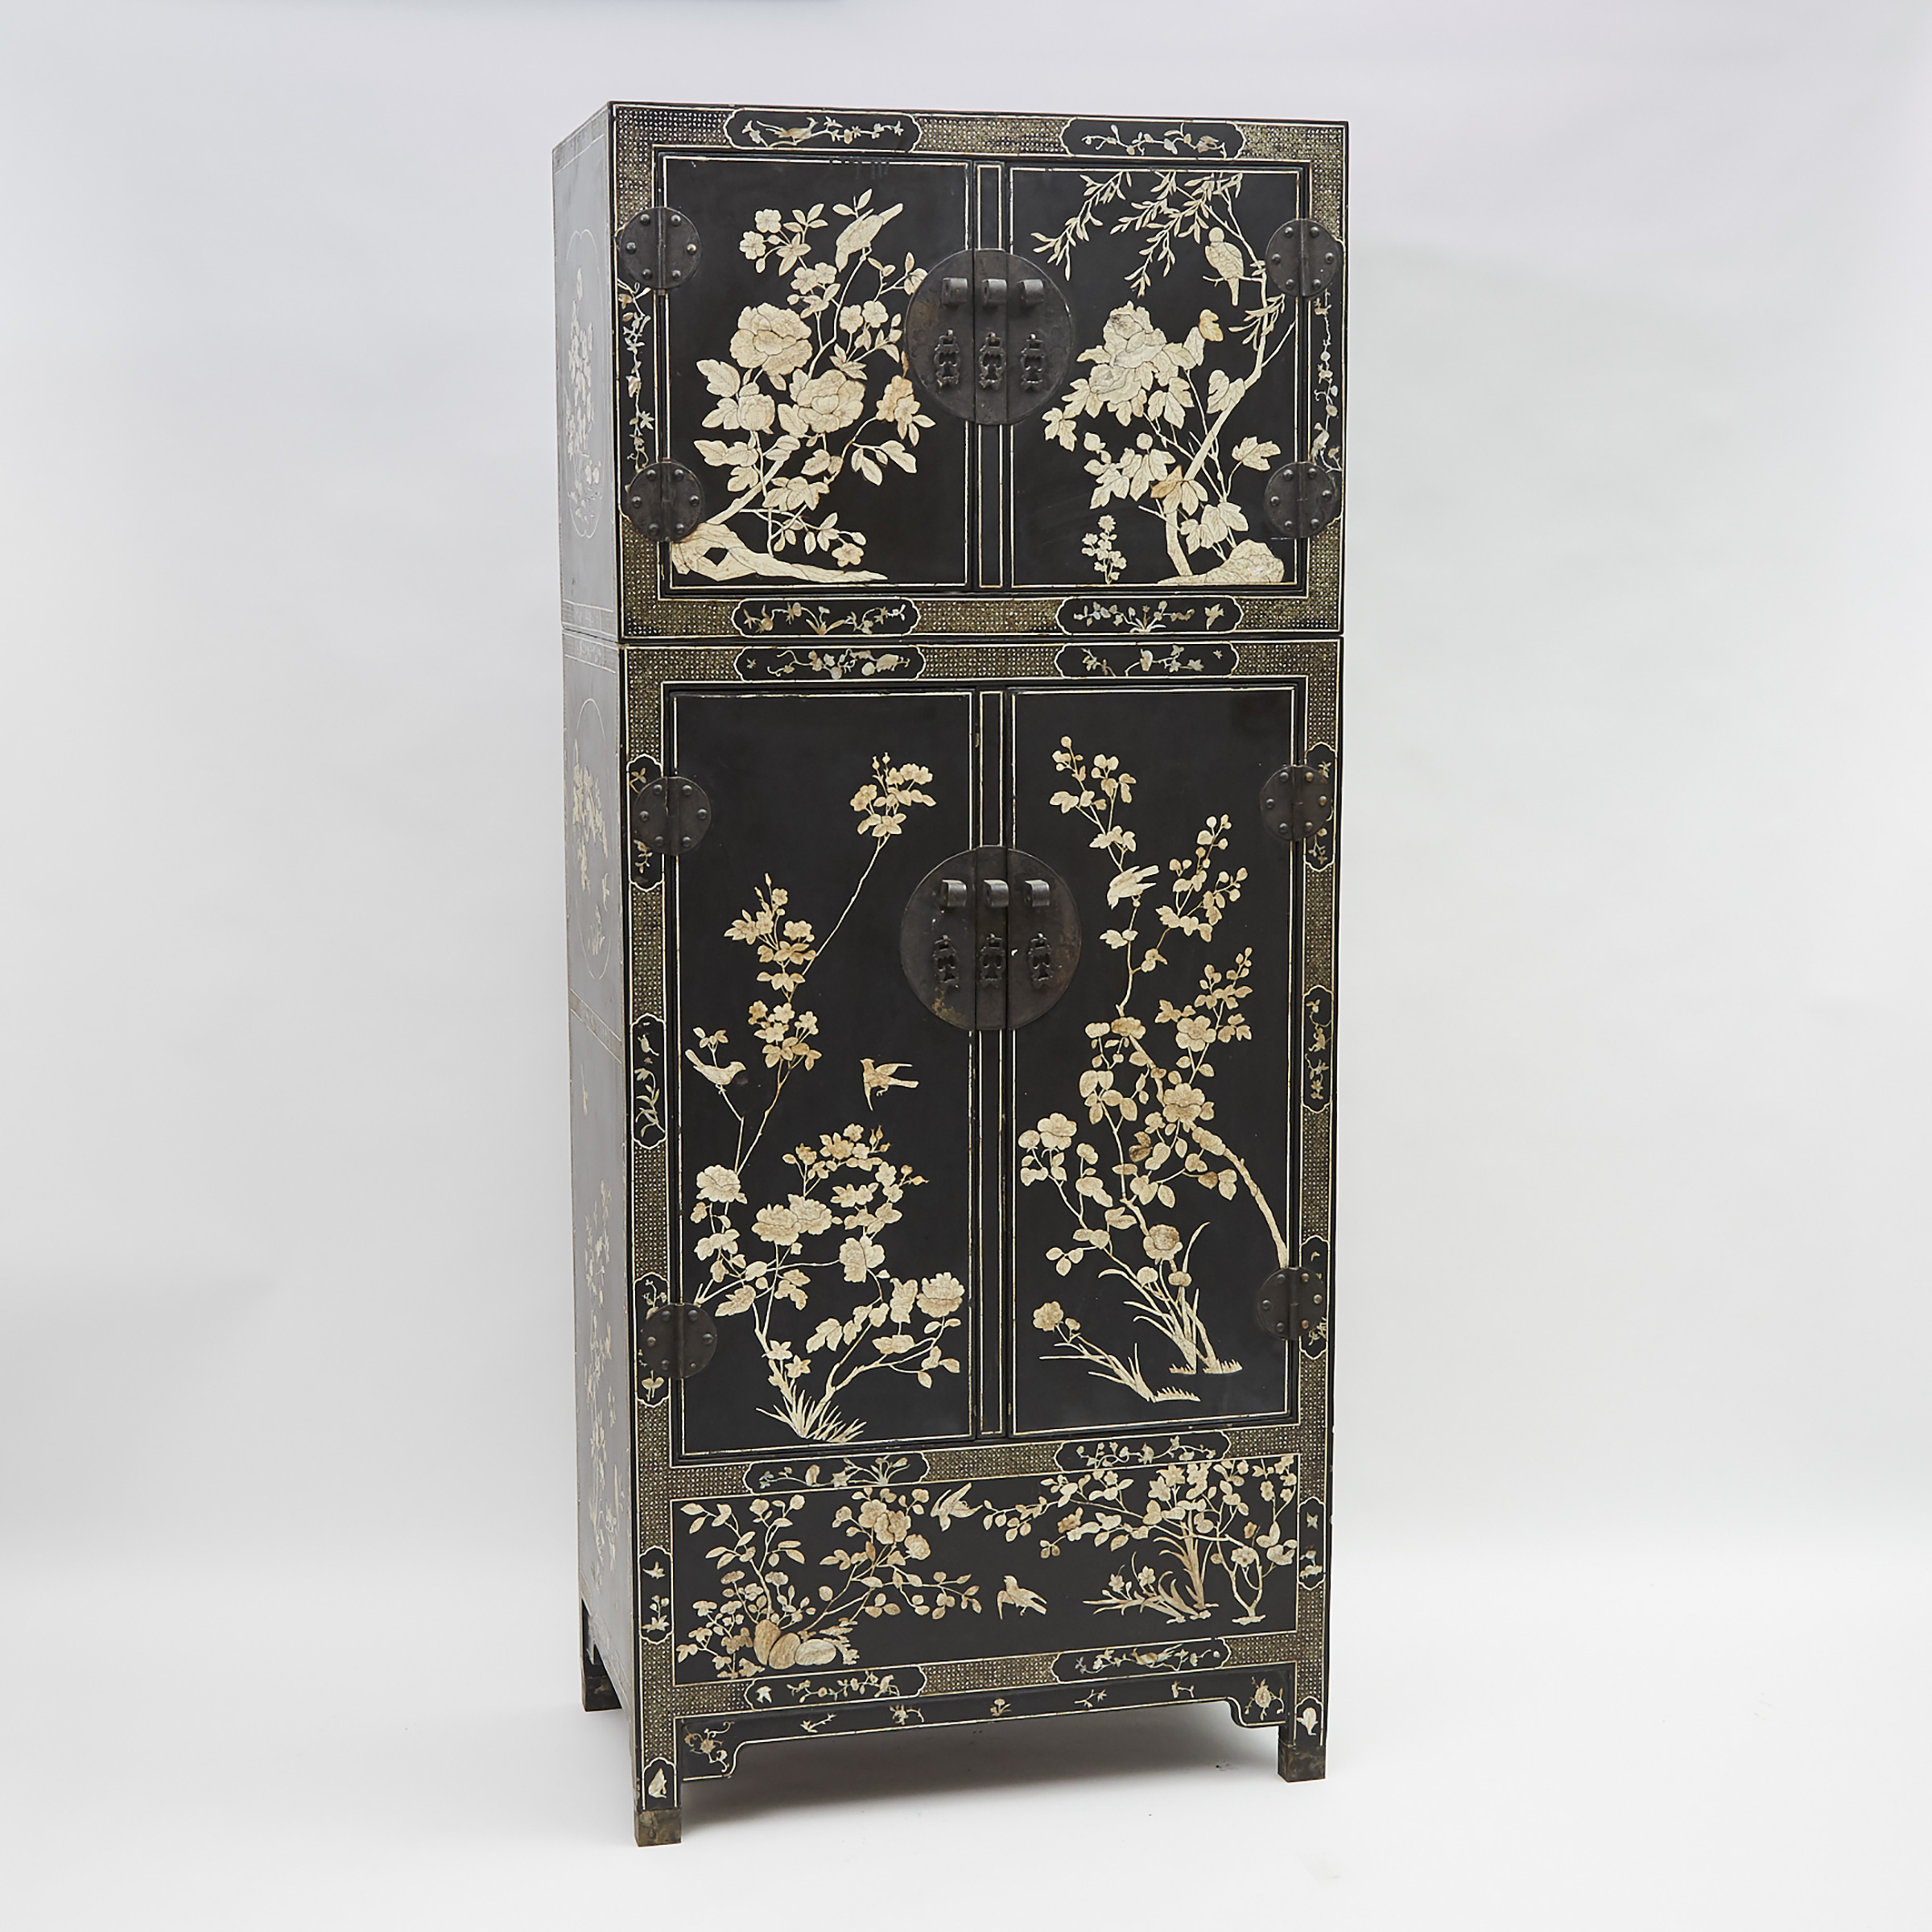 A Chinese Black Lacquer Mother-of-Pearl and Bone Inlaid Two-Tier Cabinet, Early 20th Century